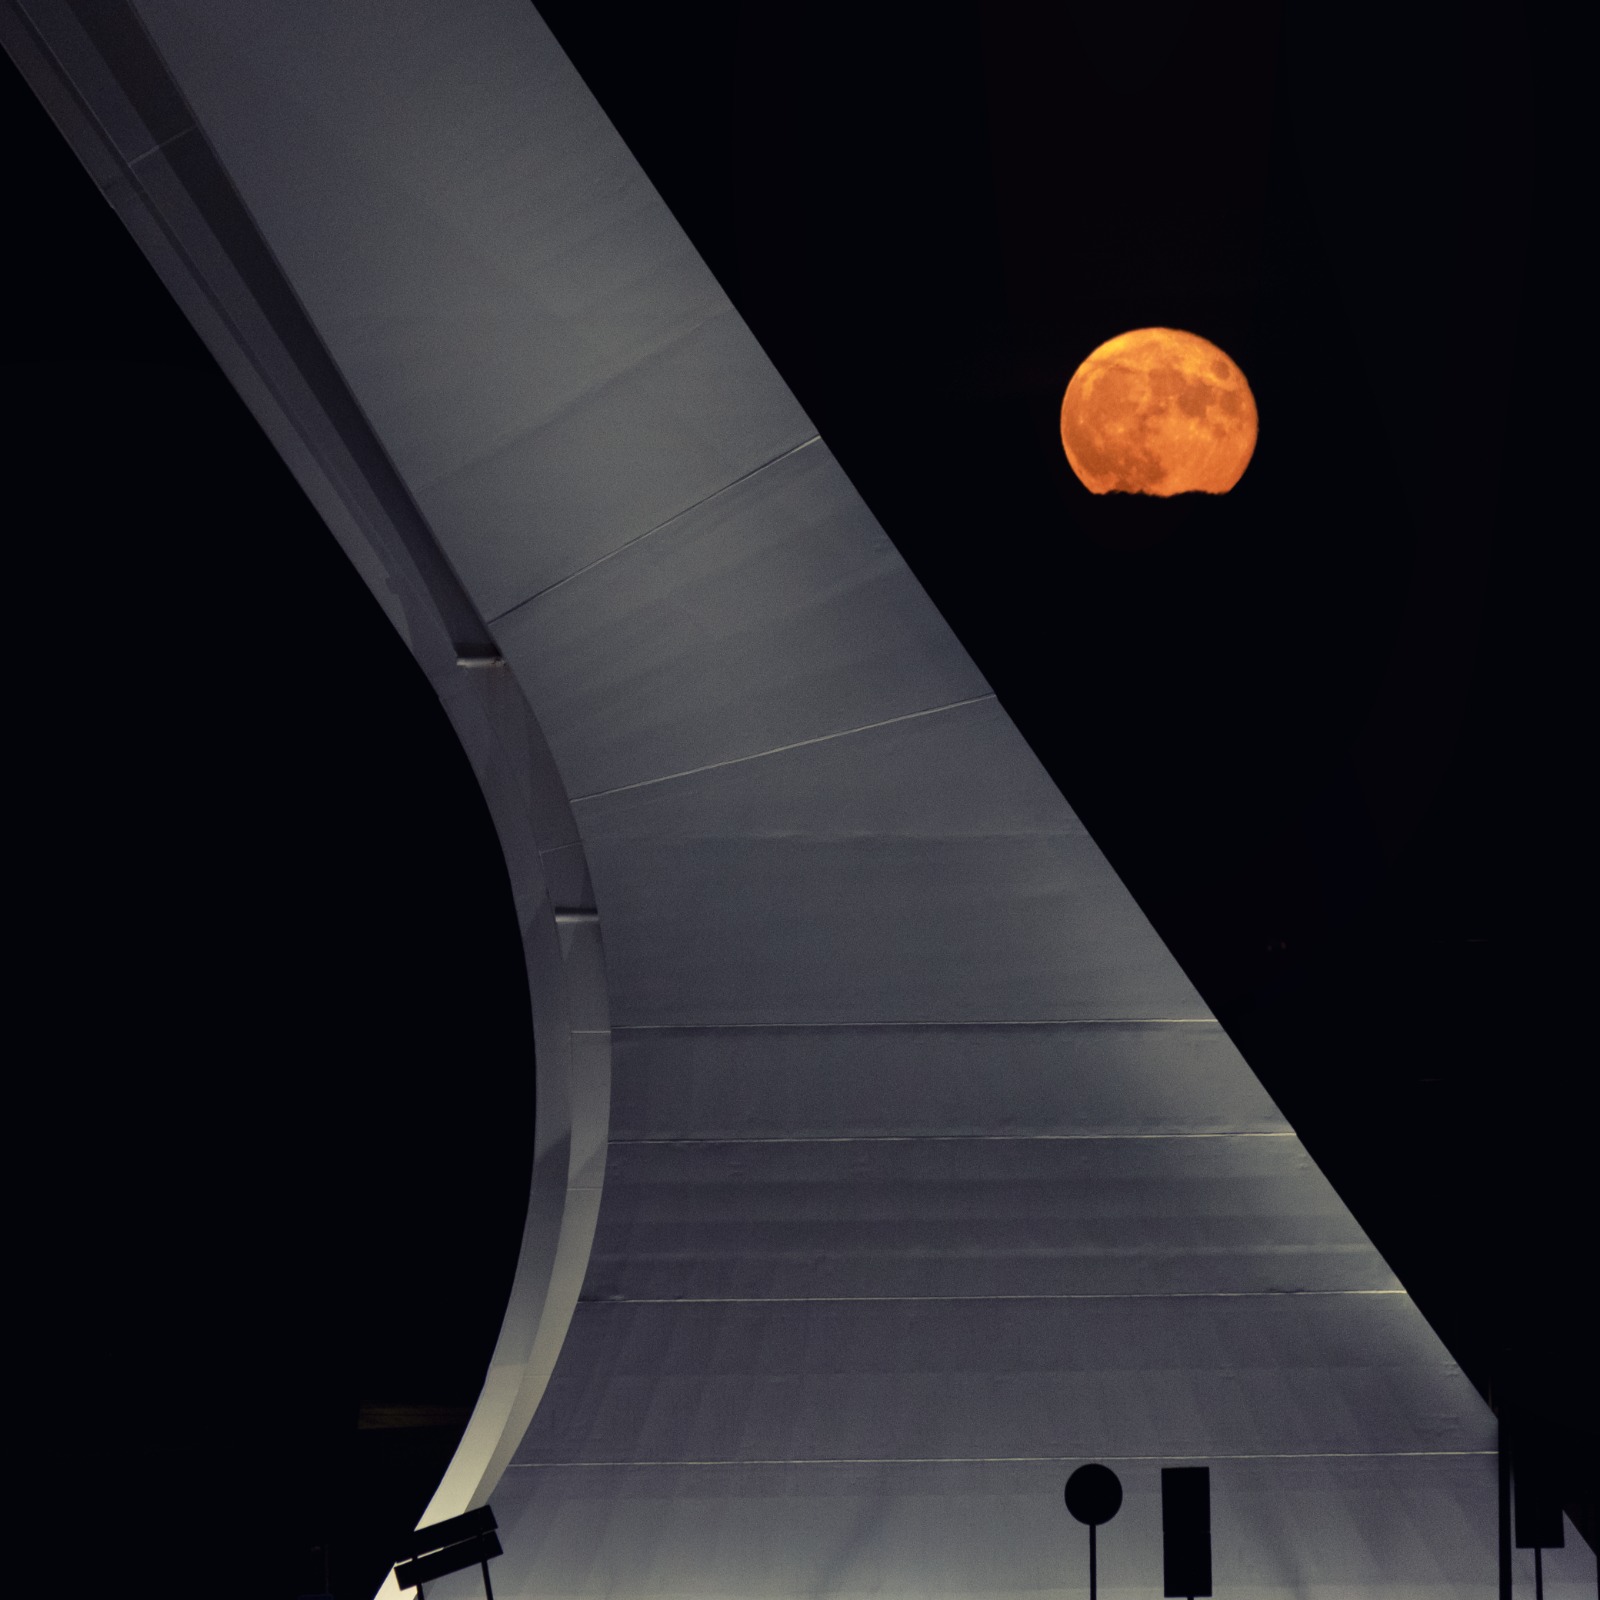 The moon and the bridge...